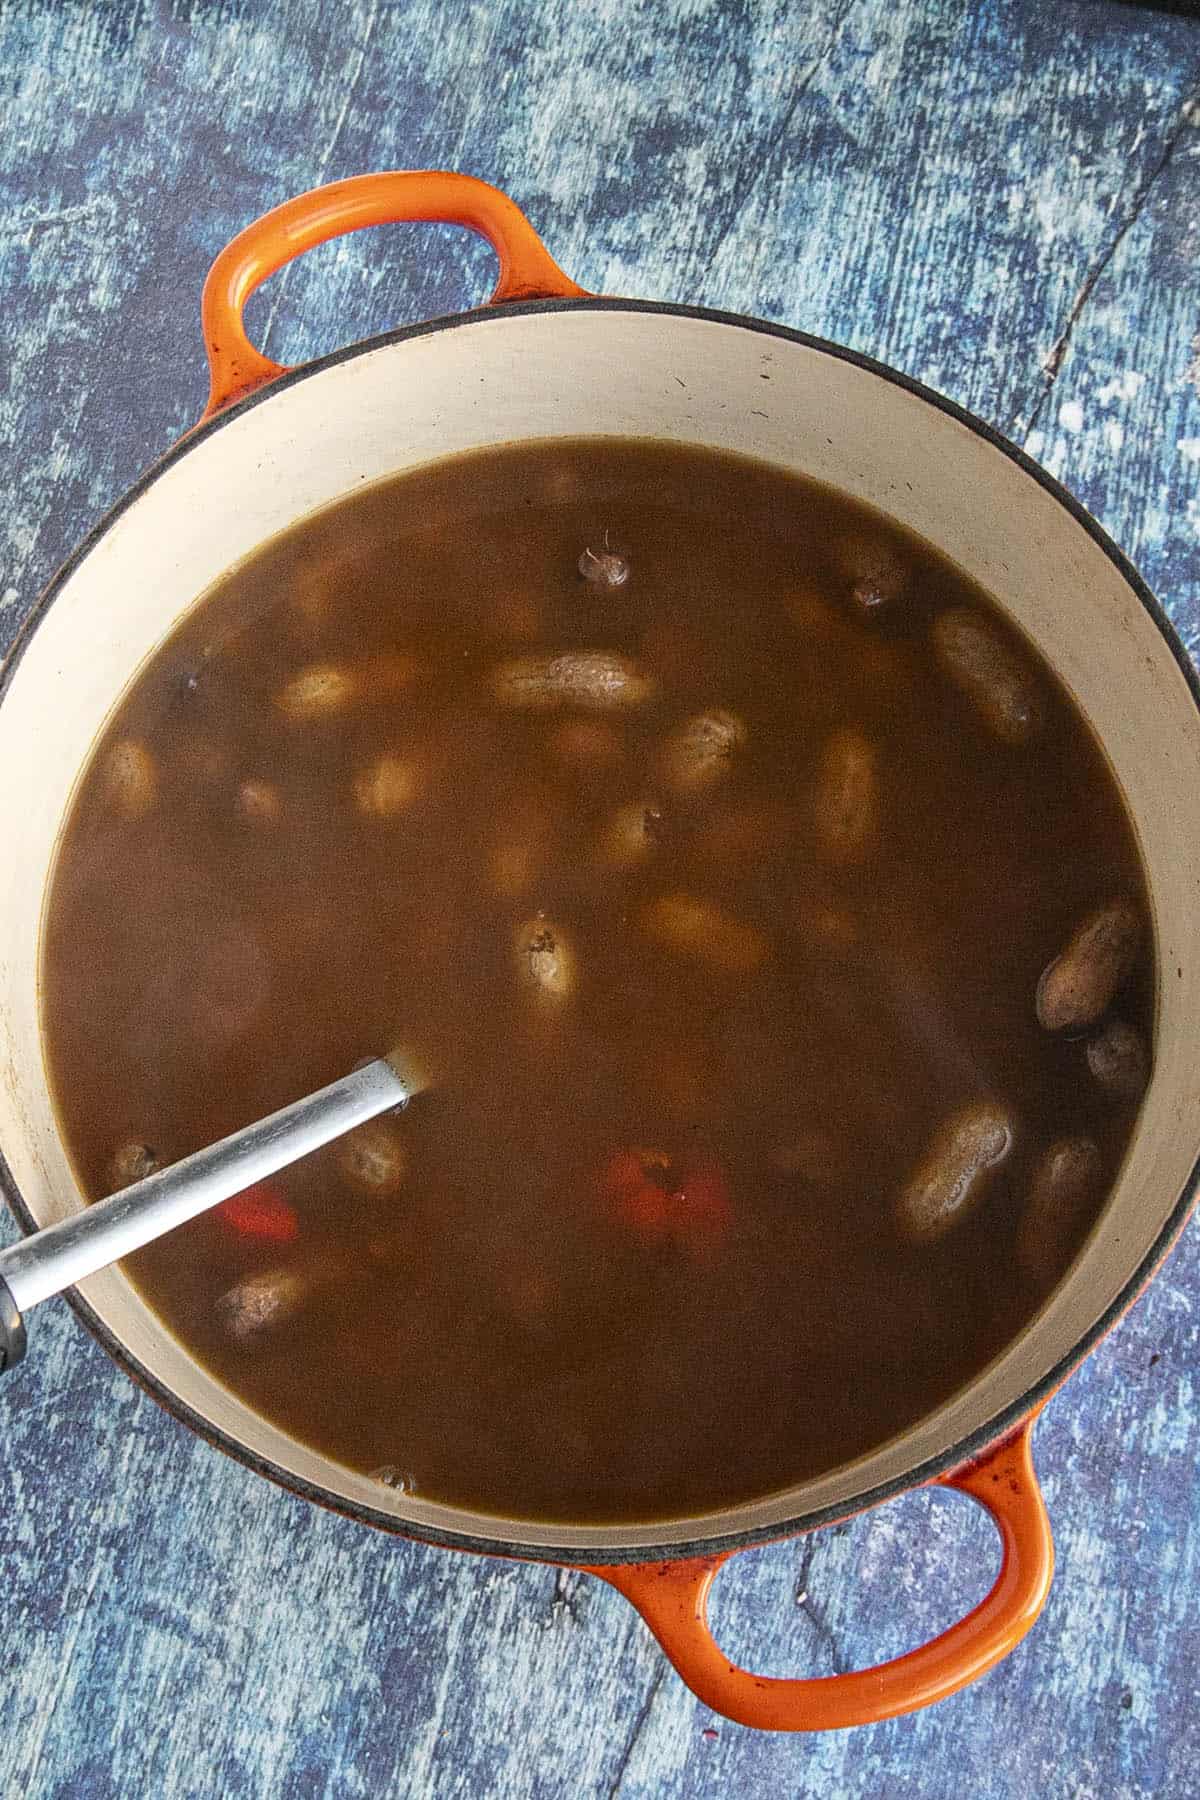 Making boiled peanuts in a pot